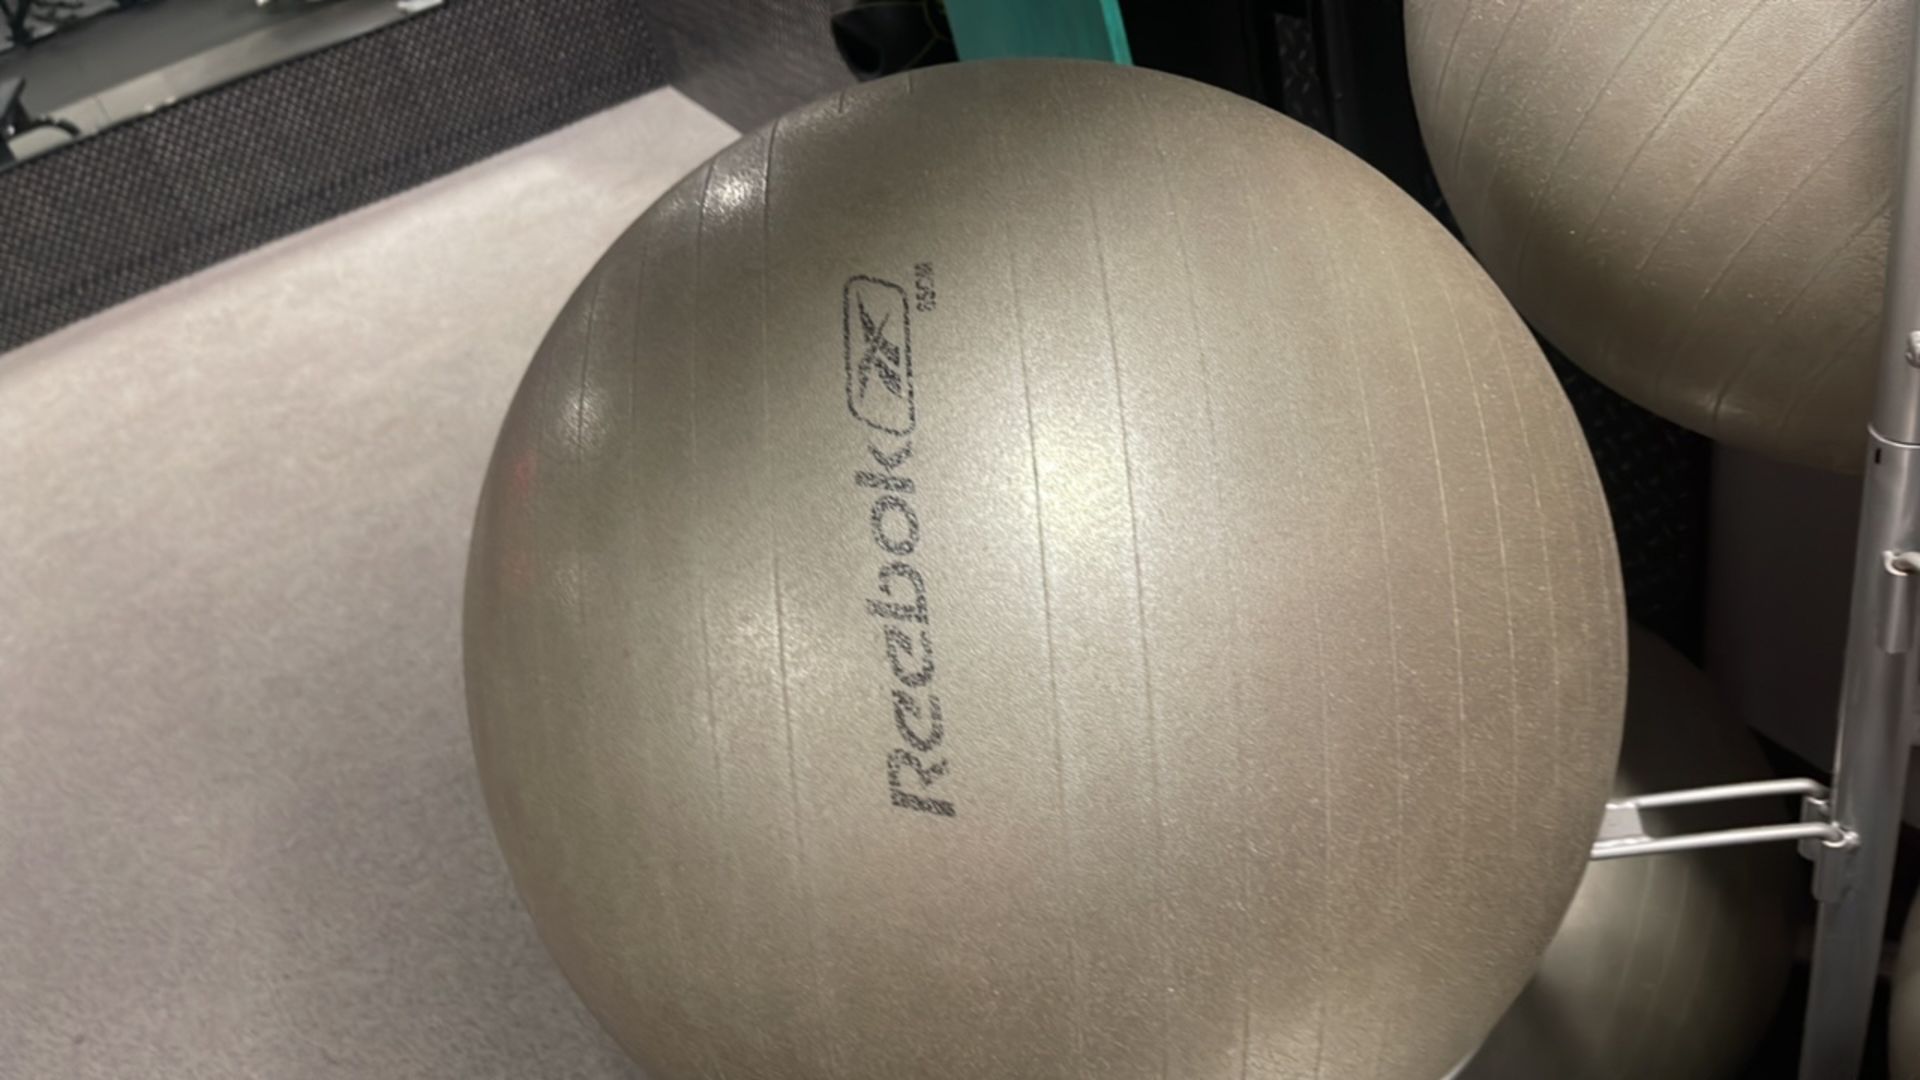 Reebok Excercise Balls & Stand - Image 2 of 4